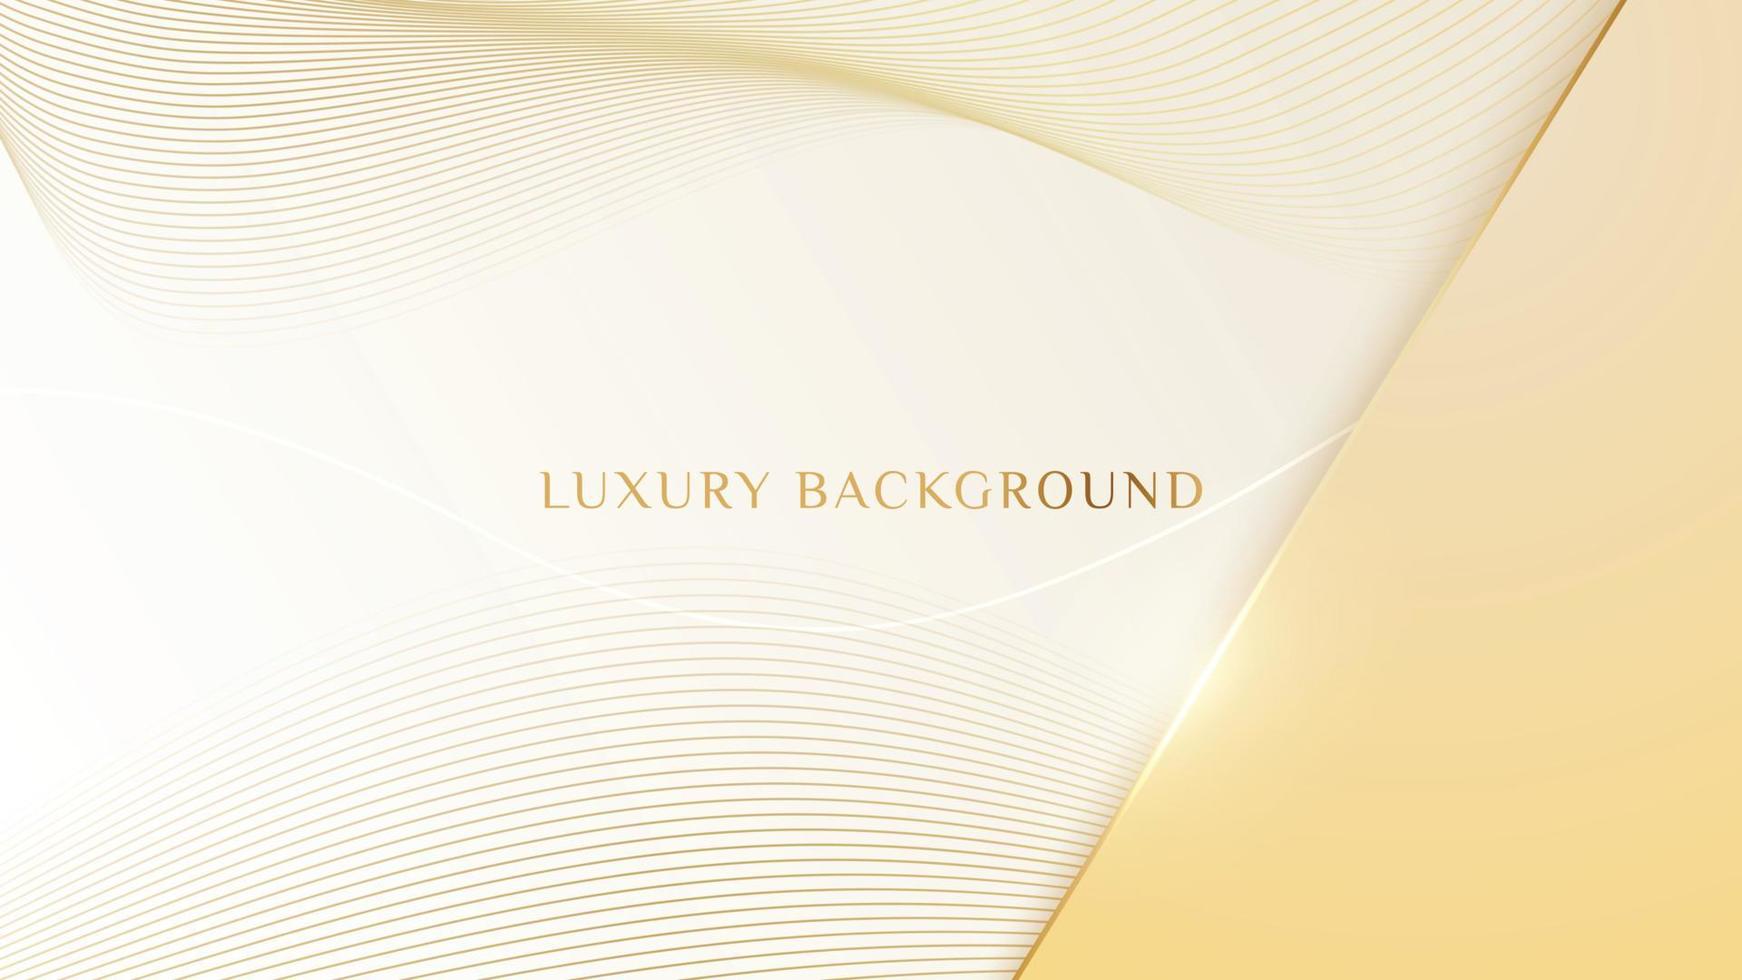 Abstract luxury light brown background with golden lines element and 3d paper cut vector